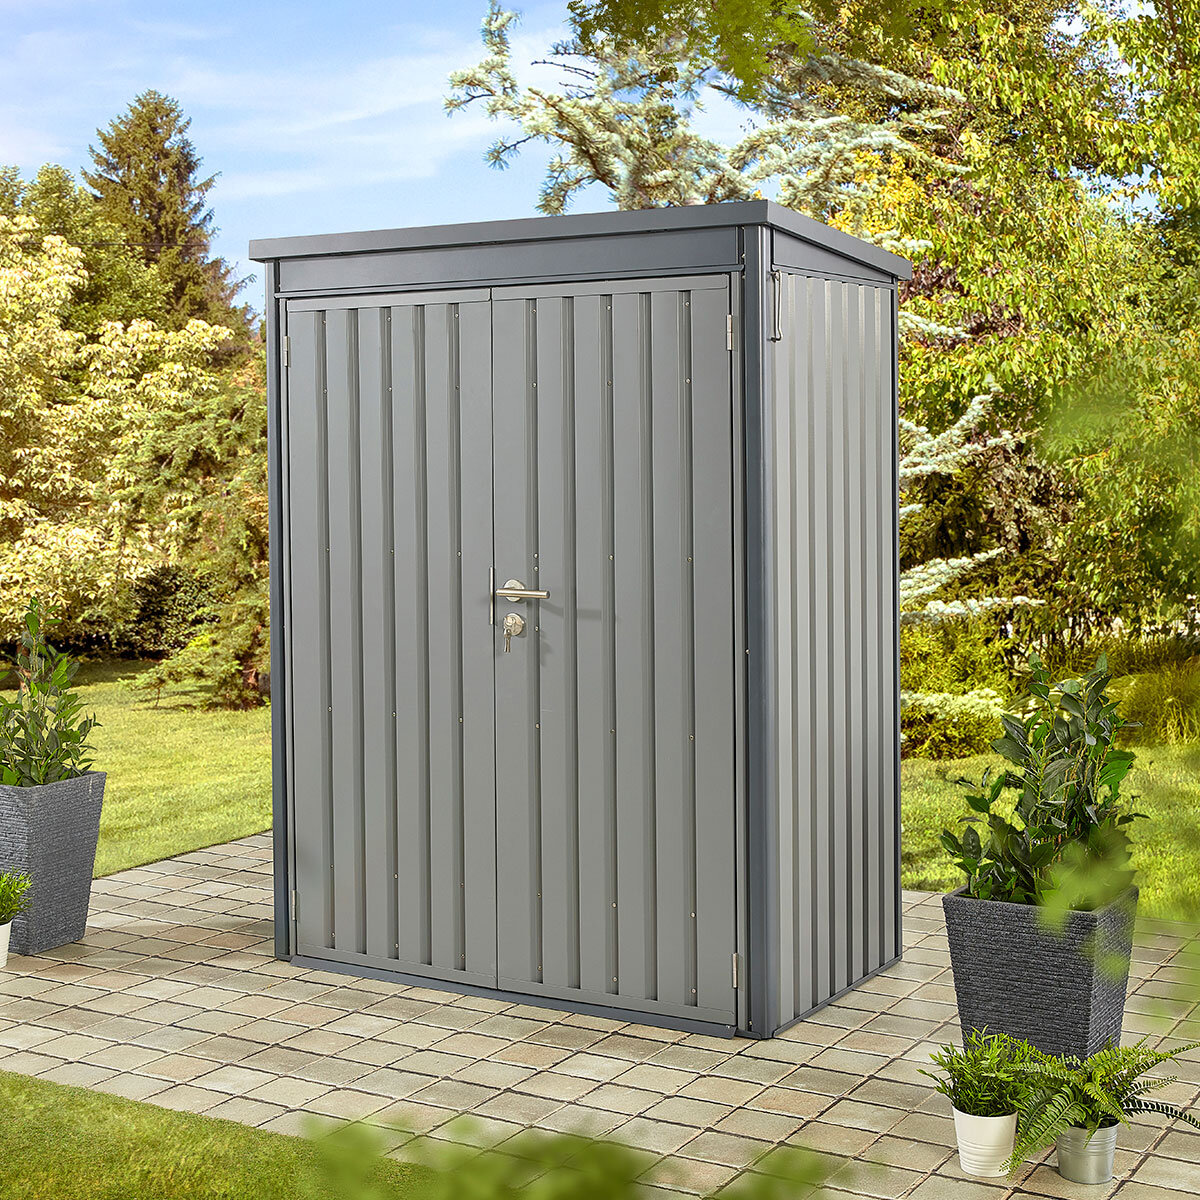 Stone Garden 4ft 7" x 2ft 6" (1.45 x 0.8m) Vertical 1,887 Litre Steel Shed in Grey